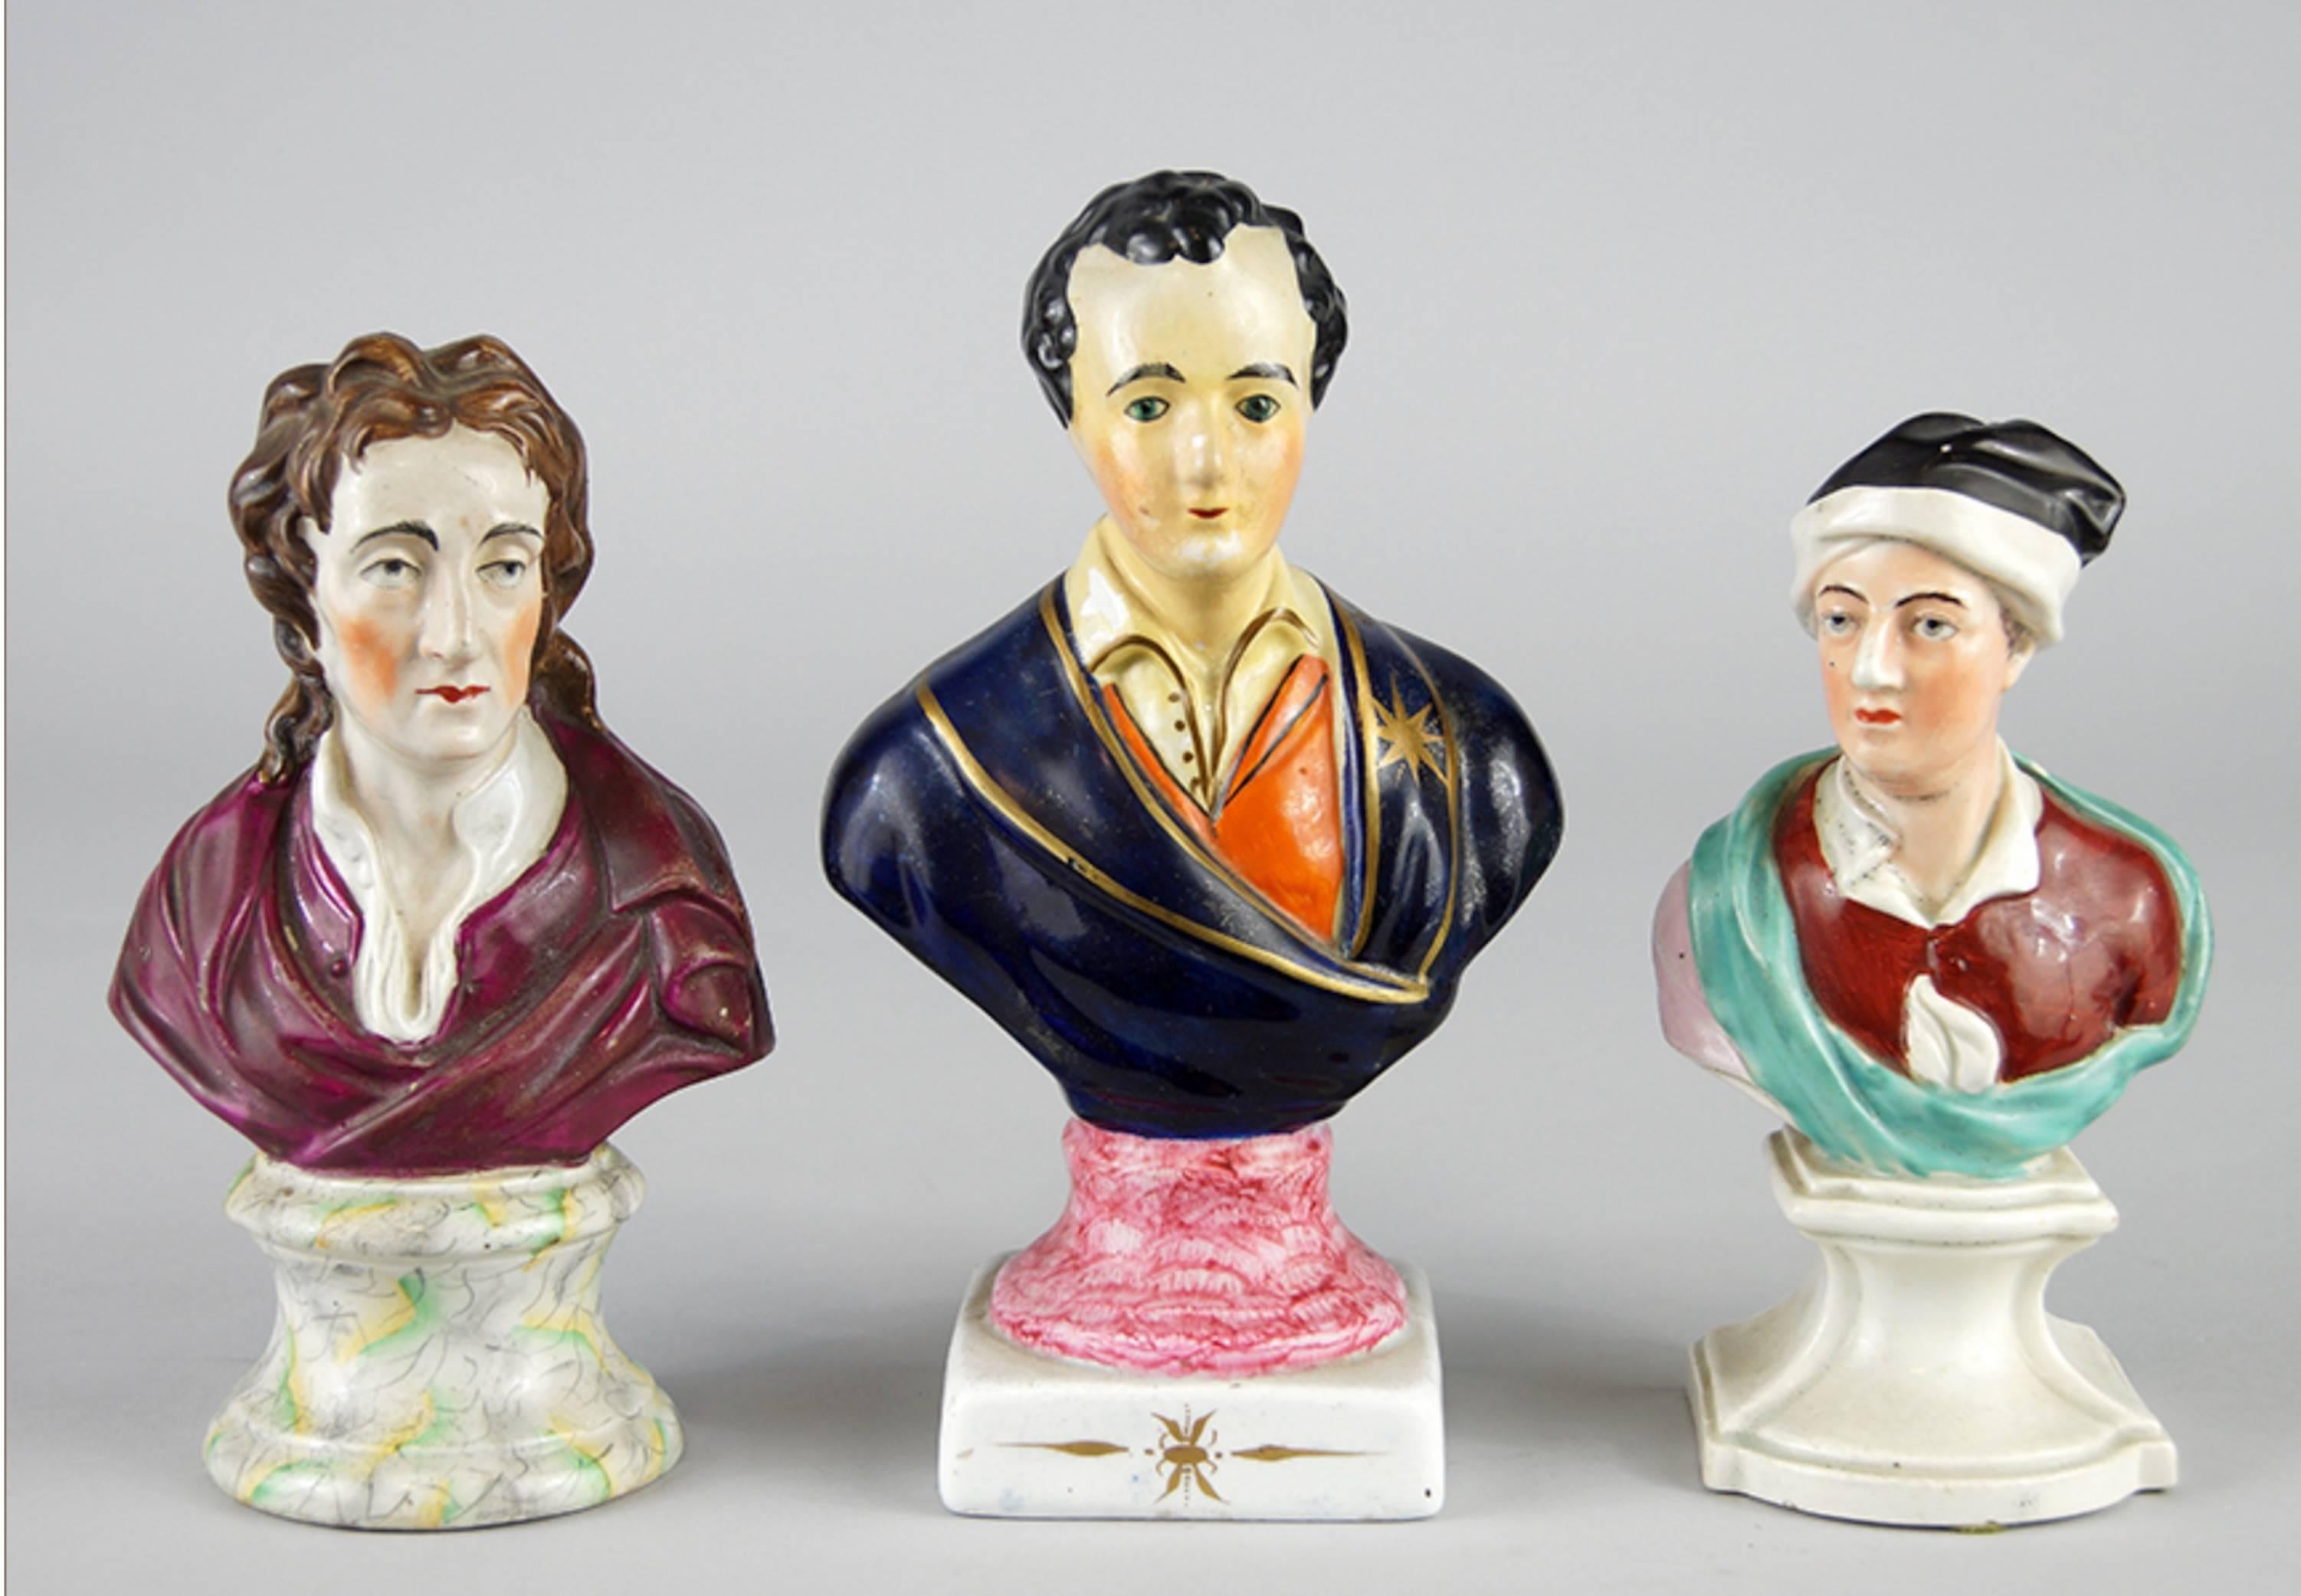 Regency Handsome Collection of Seven 19th Century English Staffordshire Bust Priced/Bust For Sale